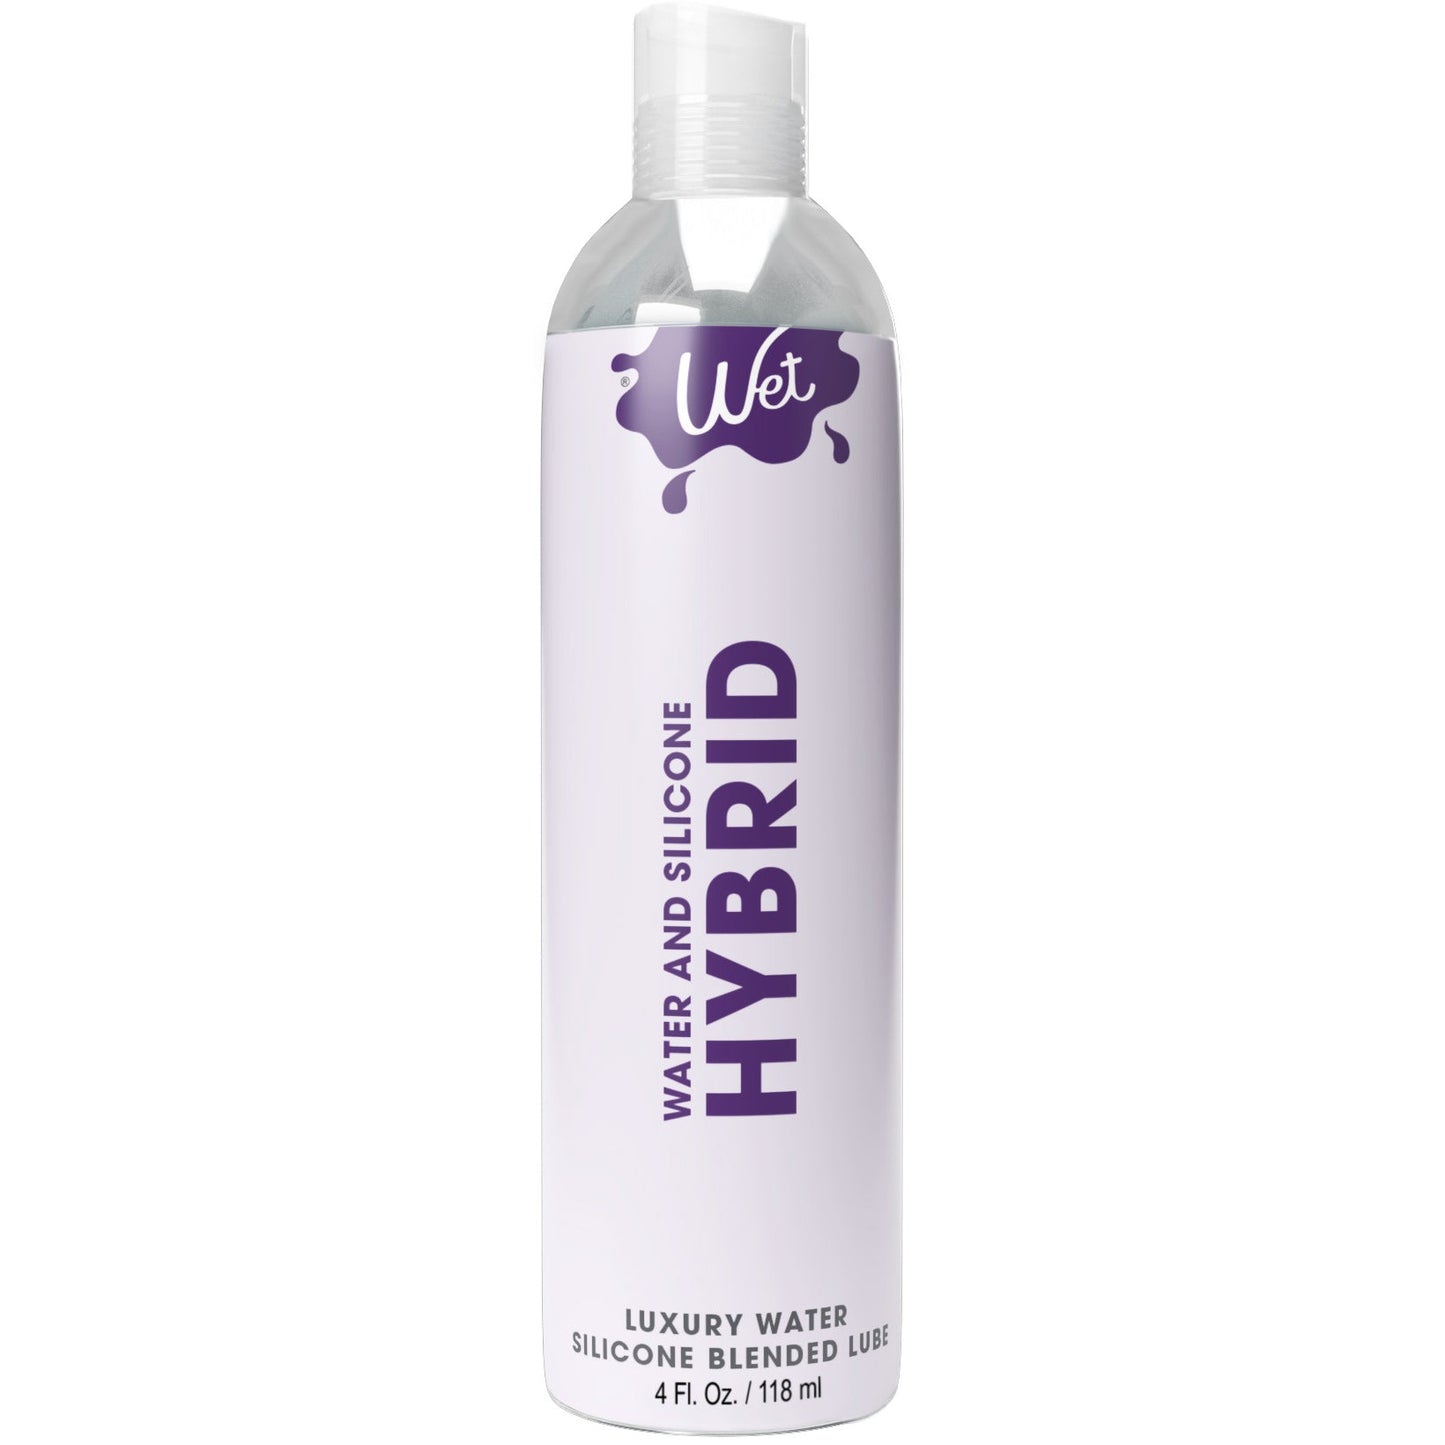 Wet Hybrid Luxury Water/silicone Blend Based  Lubricant 4 Oz